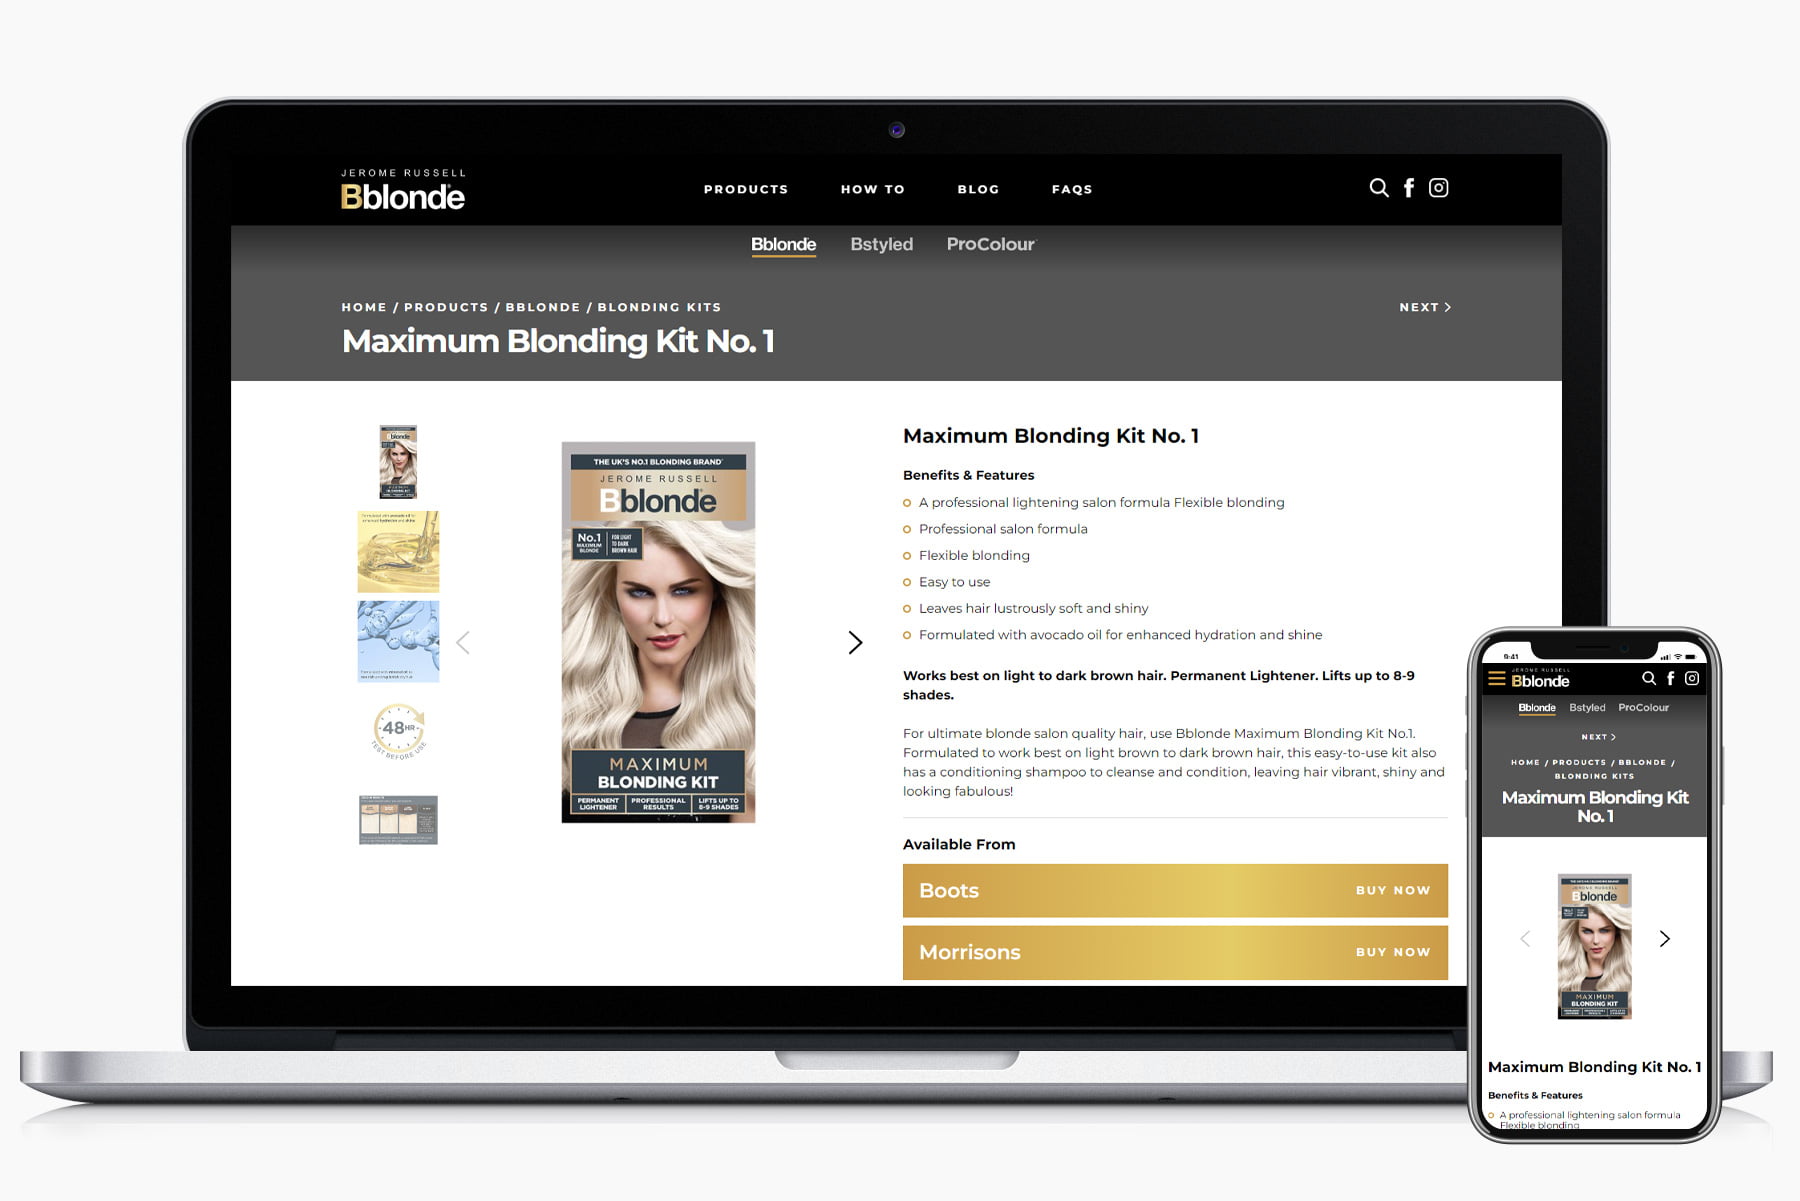 Bblonde Product Page